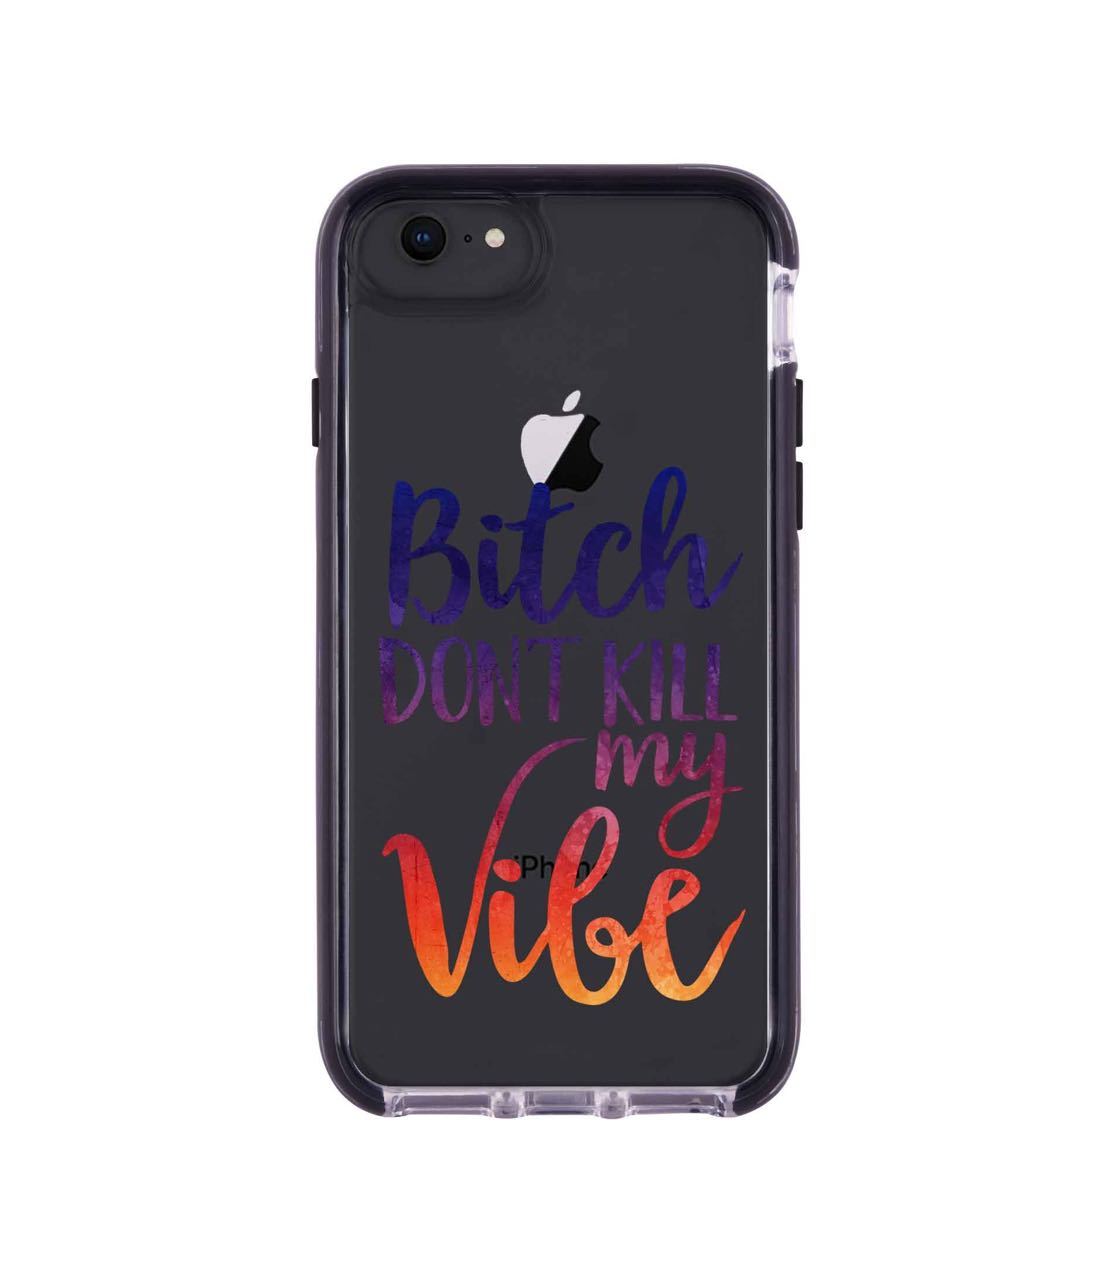 Dont kill my Vibe - Extreme Phone Case for iPhone 8